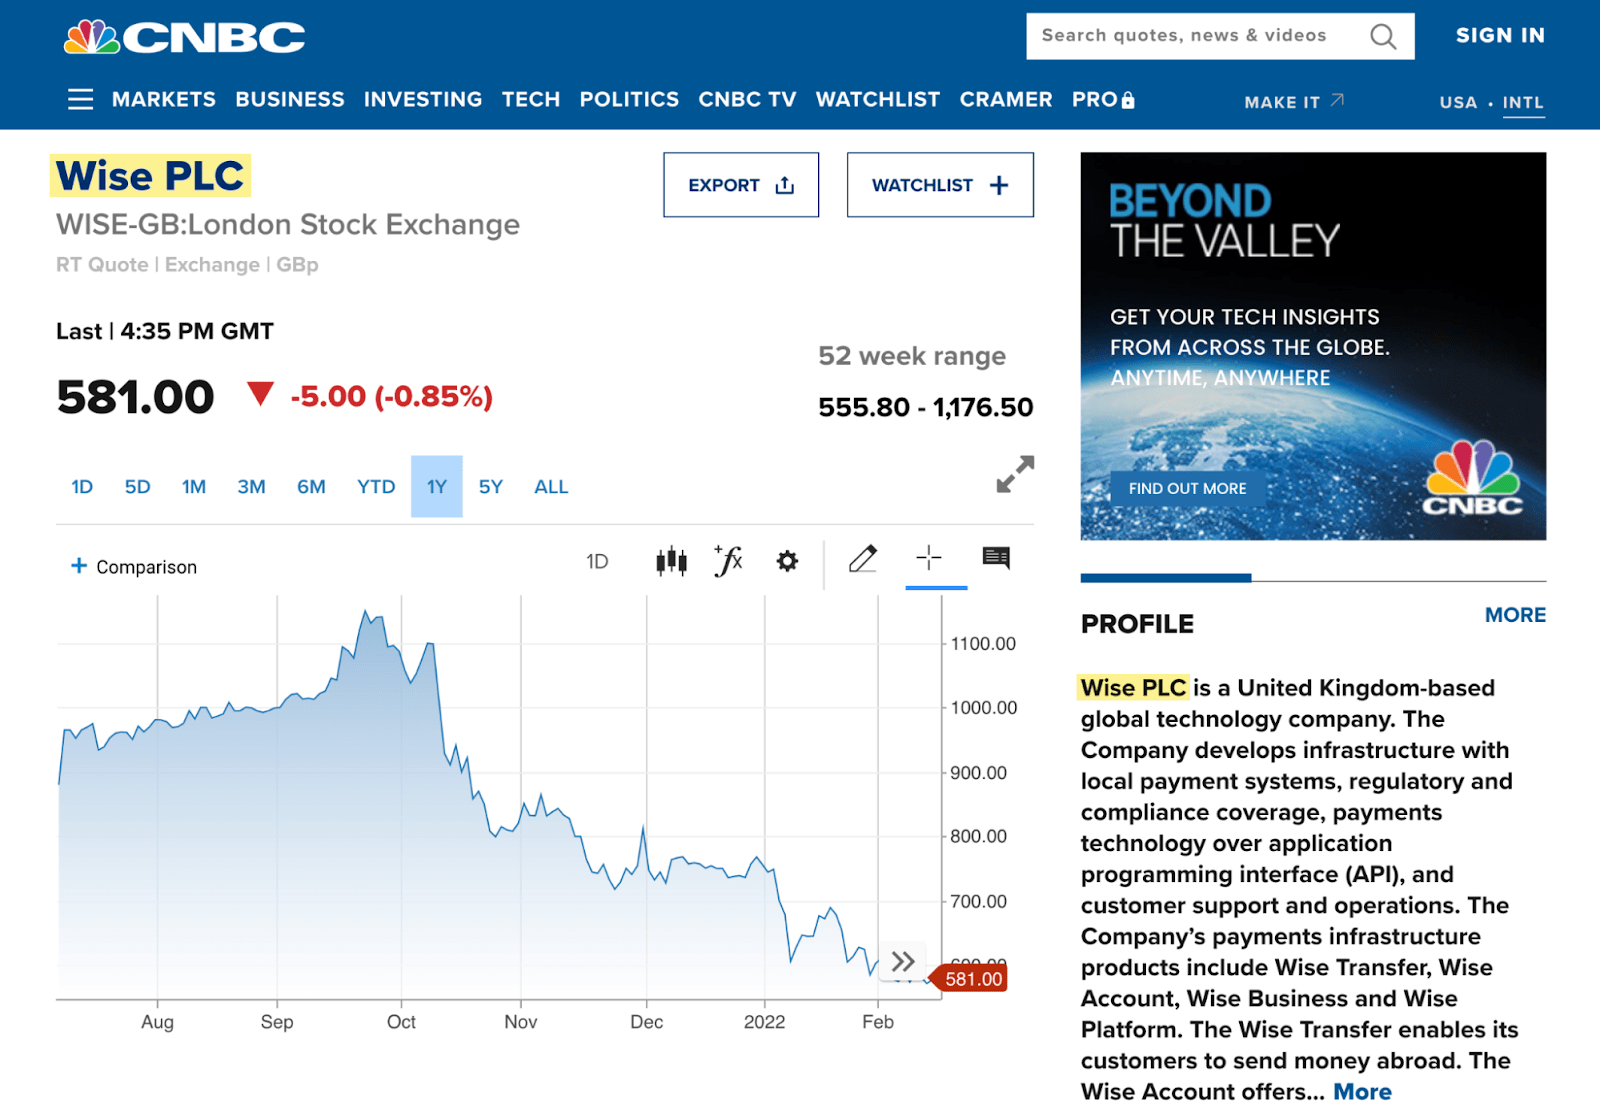 Wise's stock profile on CNBC's page